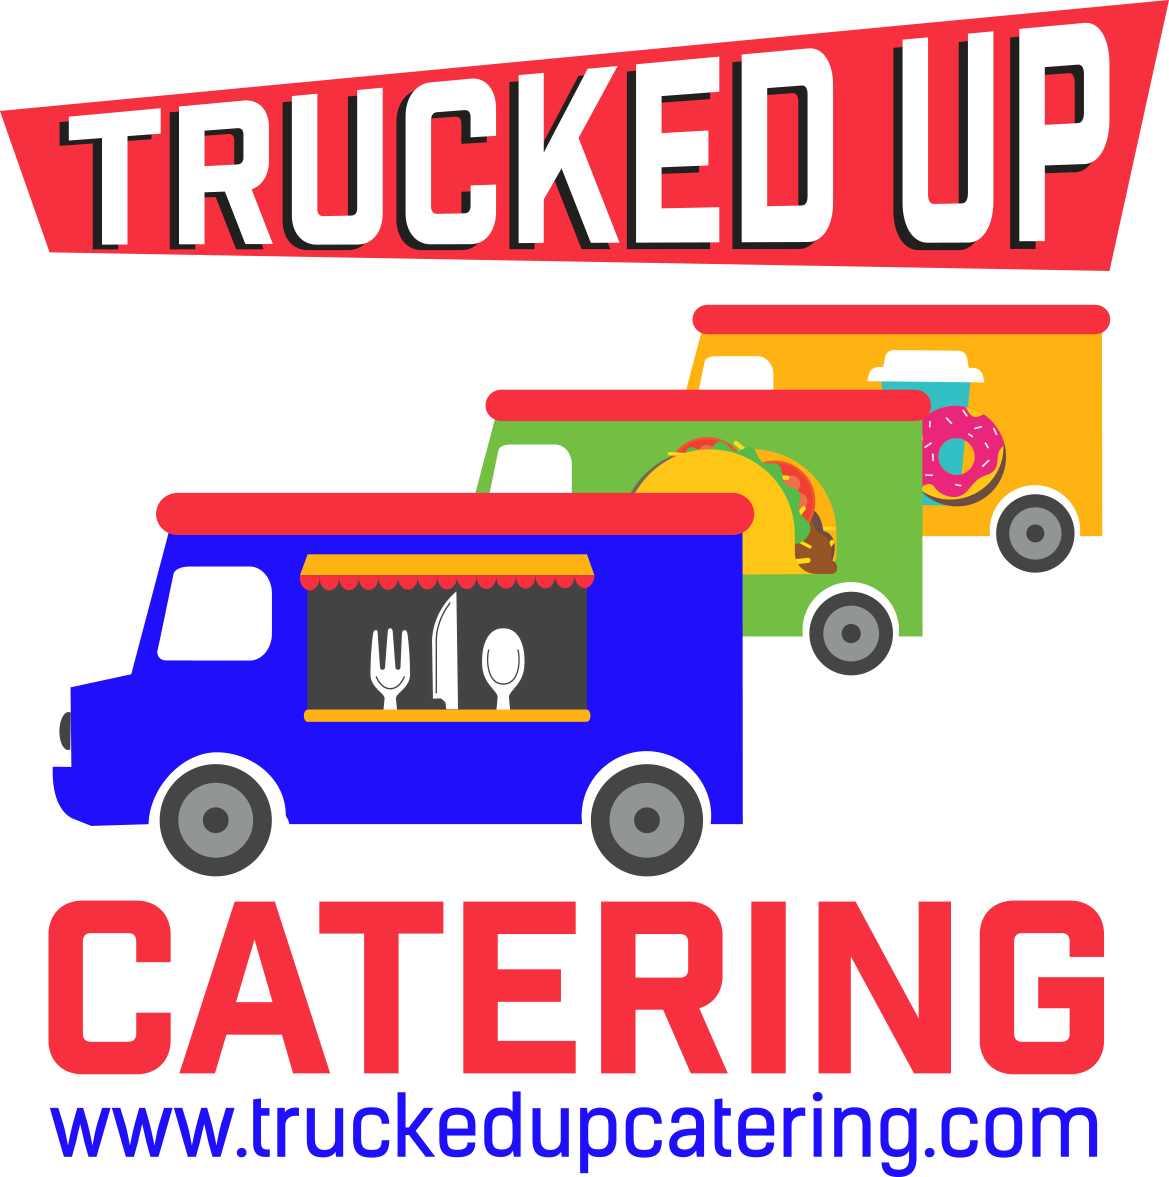  Trucked Up Catering